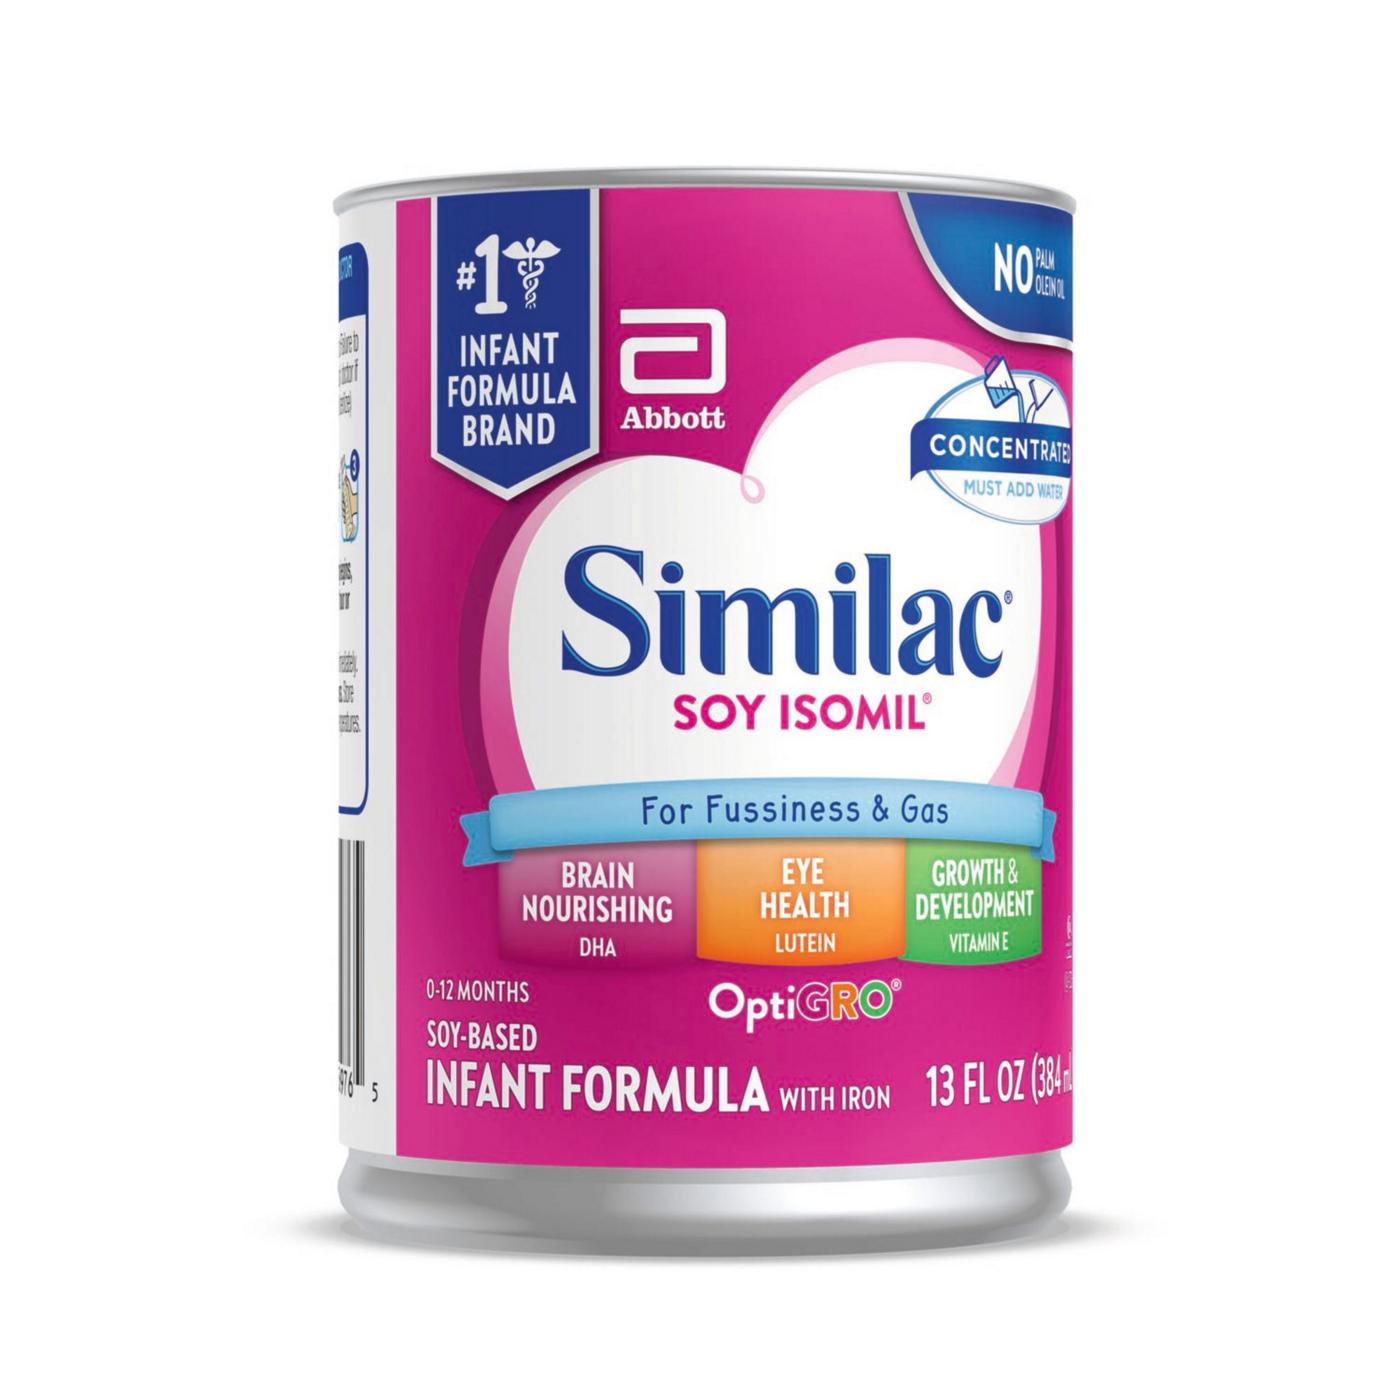 Similac Soy Isomil For Fussiness and Gas Infant Formula with Iron Concentrated Liquid; image 4 of 4